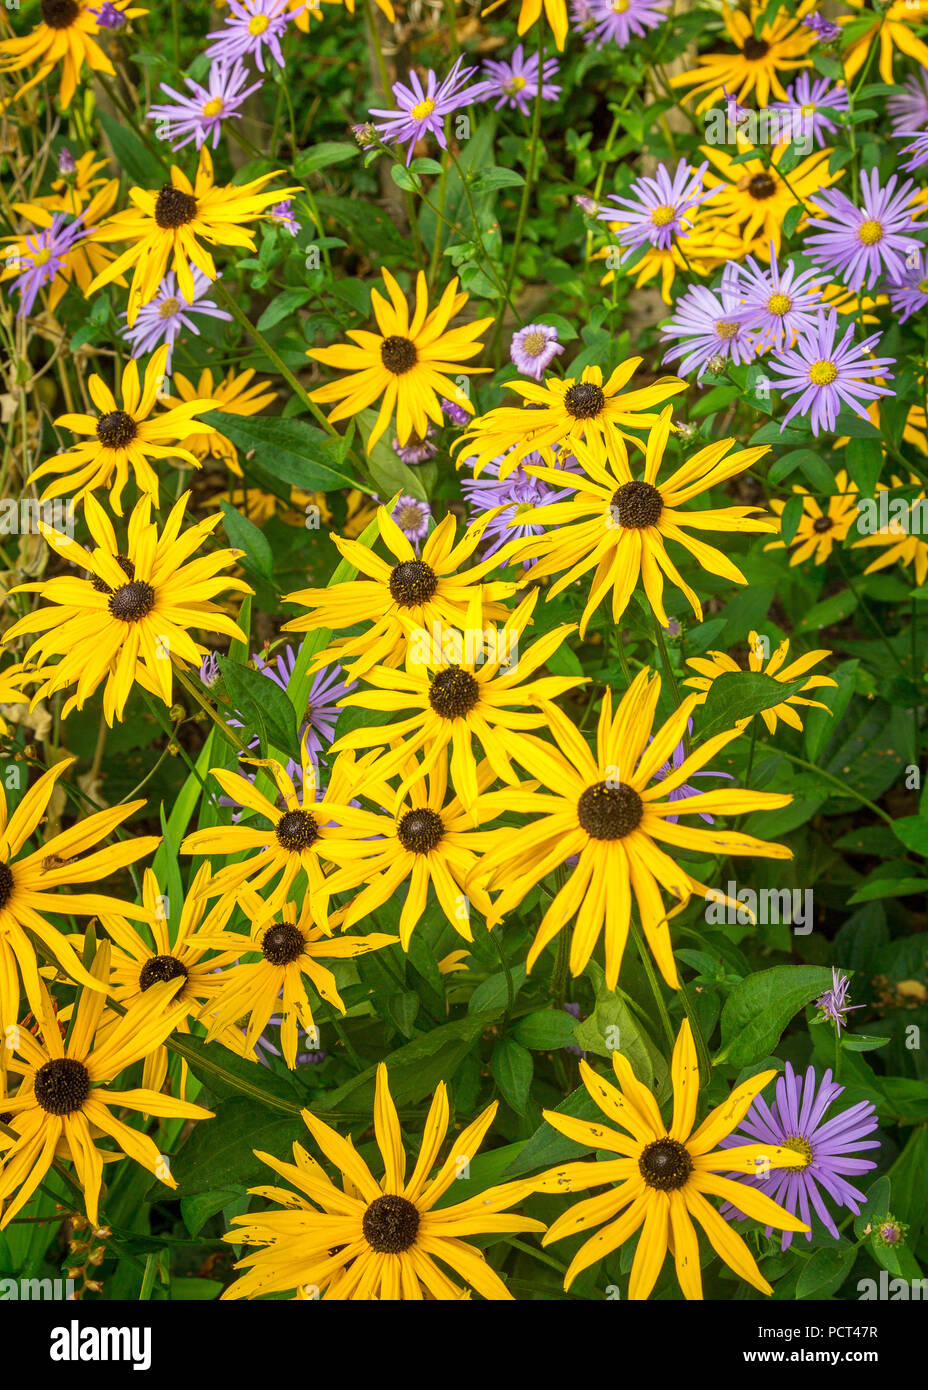 Small yellow and mauve flowers growing in public park. Stock Photo